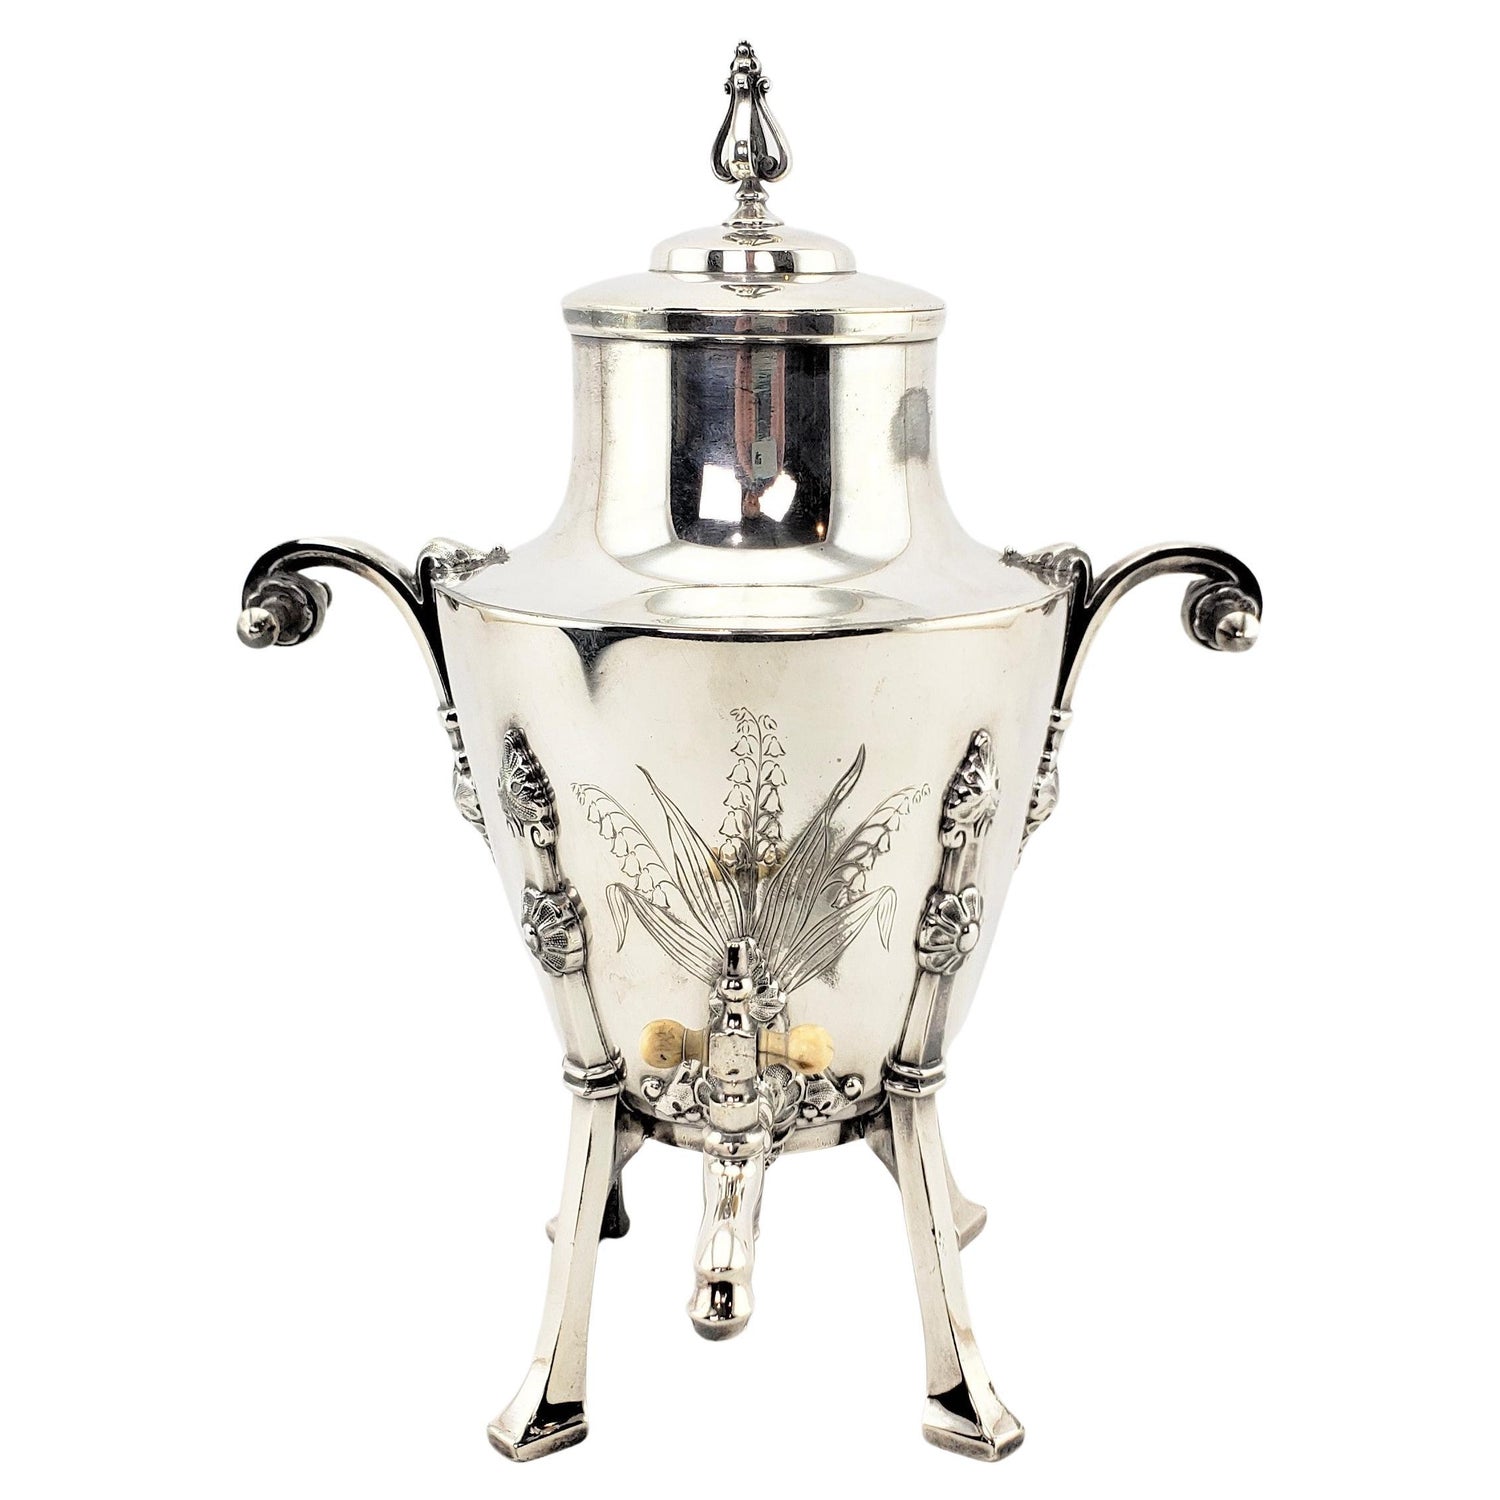 https://a.1stdibscdn.com/antique-american-aesthetic-movement-american-silver-plated-hot-water-urn-for-sale/f_13552/f_281473521649378916248/f_28147352_1649378917038_bg_processed.jpg?width=1500